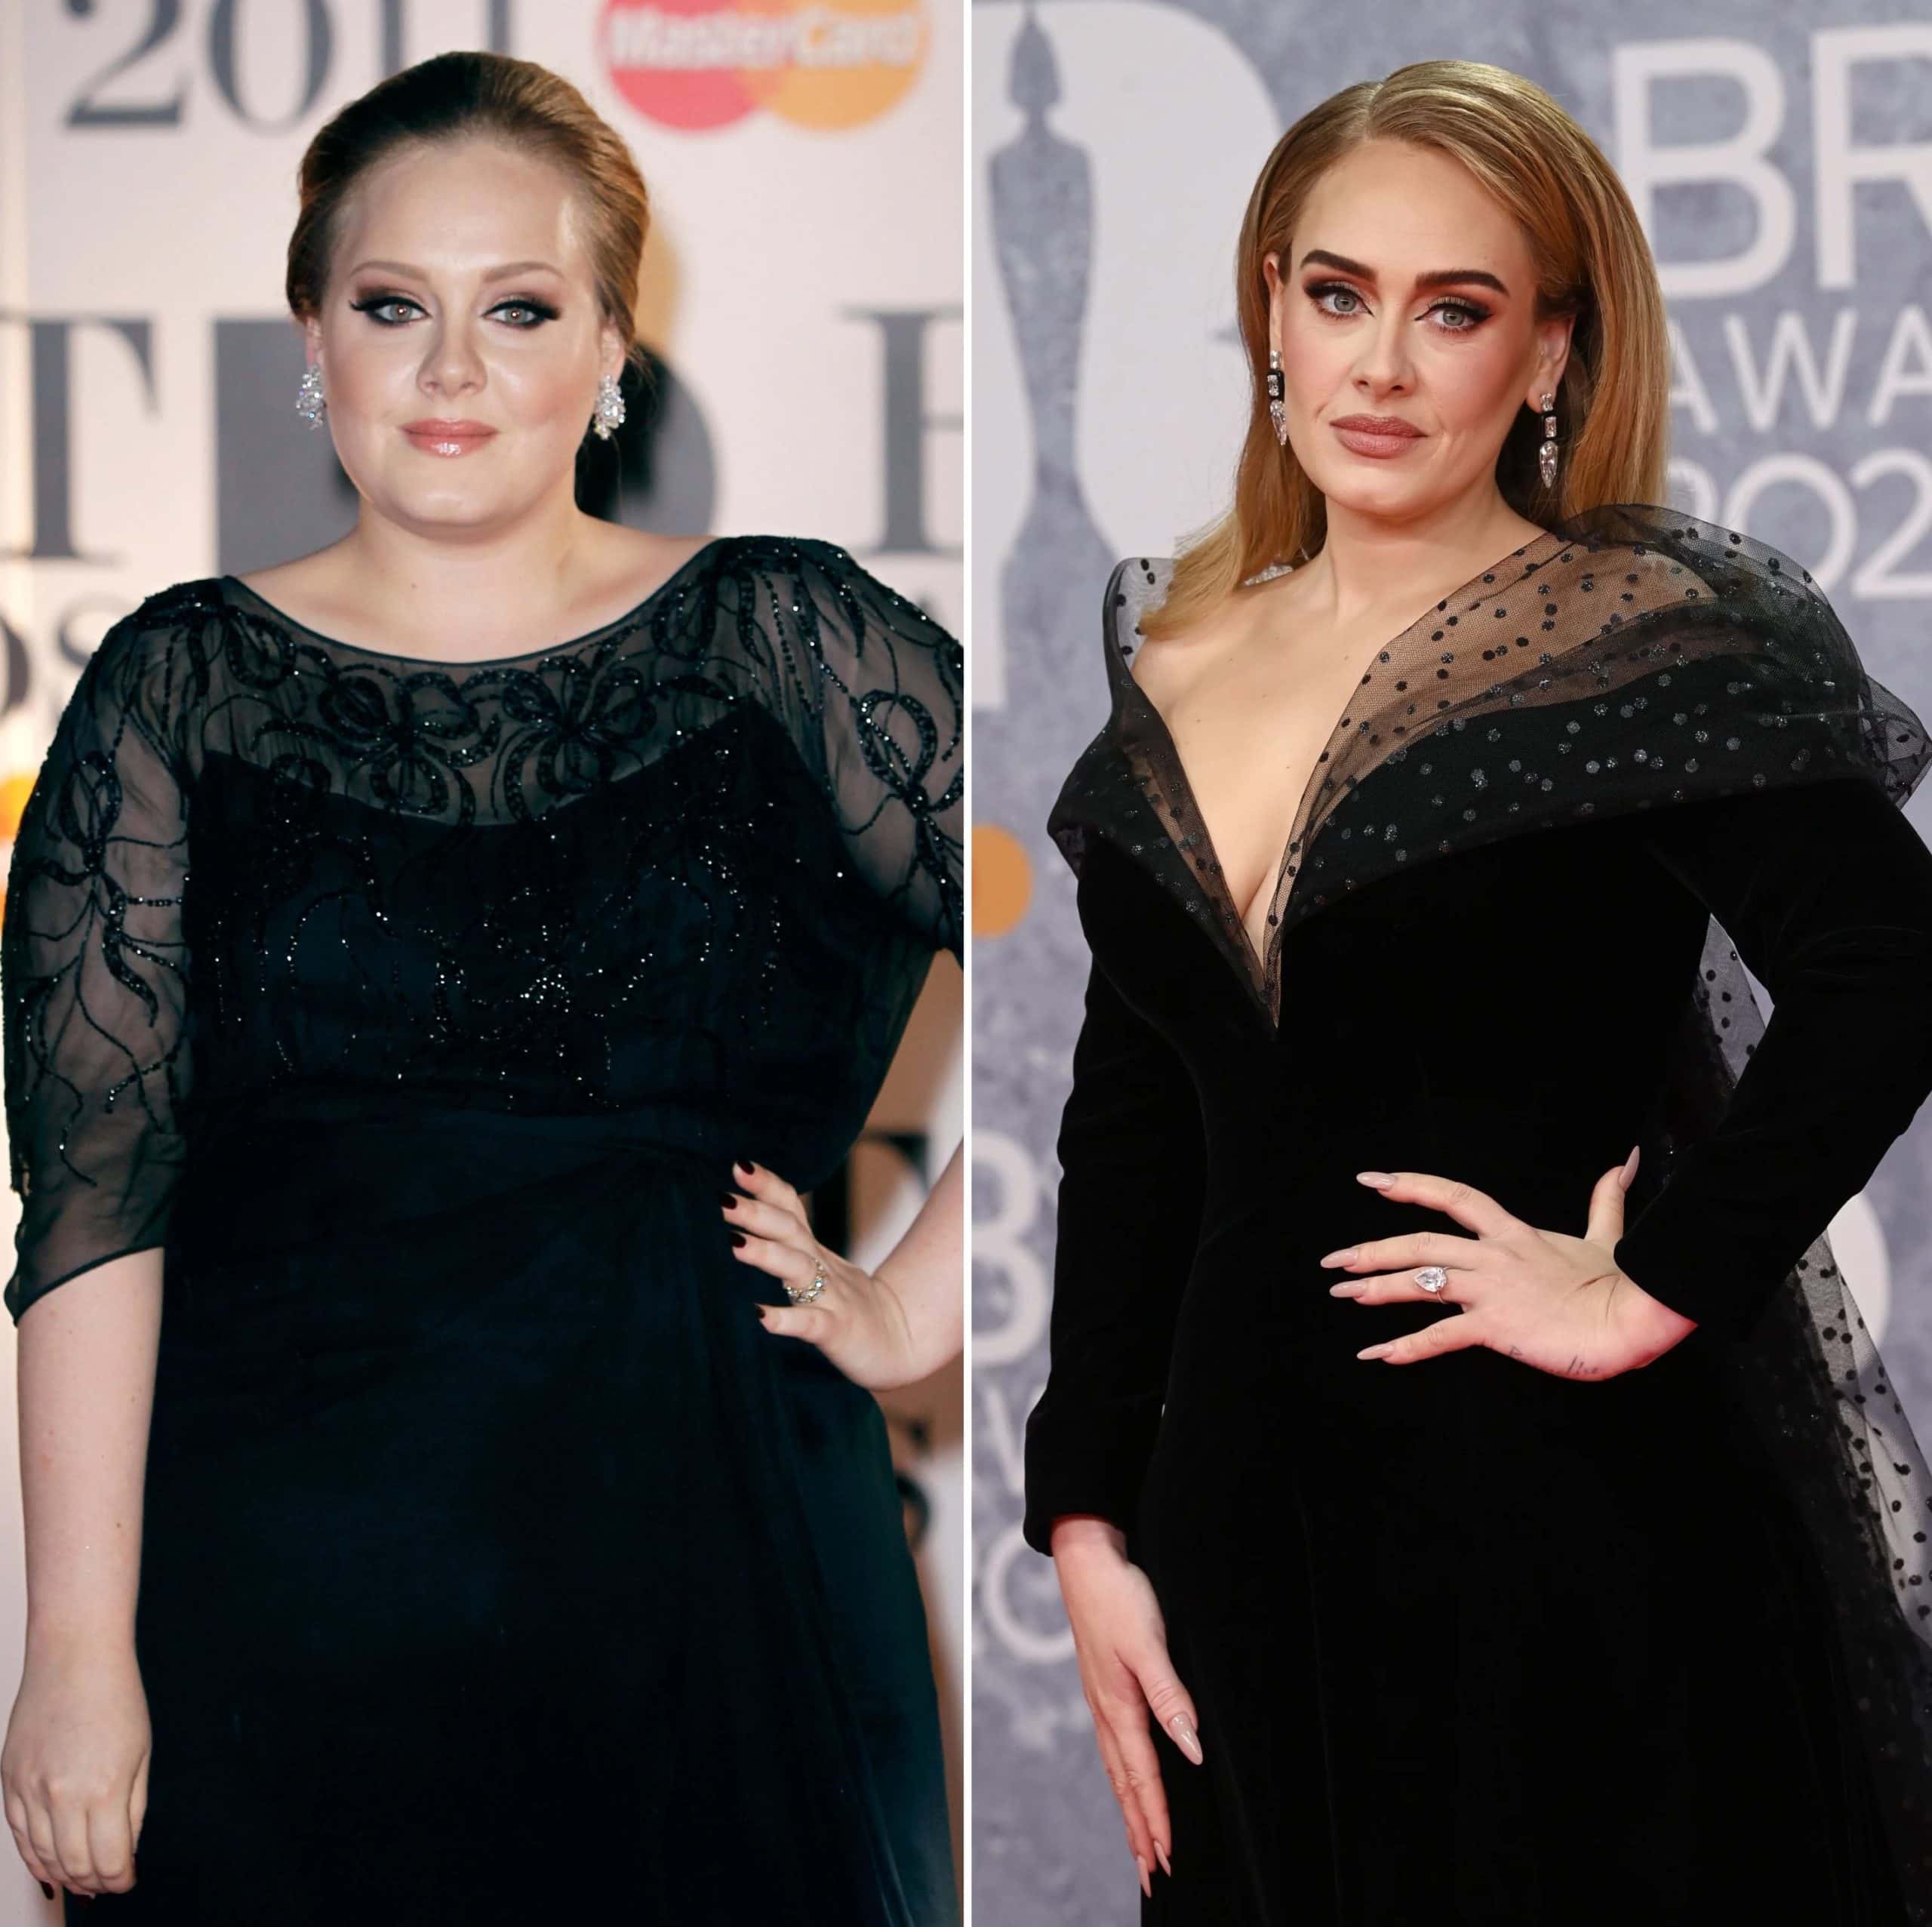 How Did Adele Lose Weight? Singer Lost Over 100 Pounds